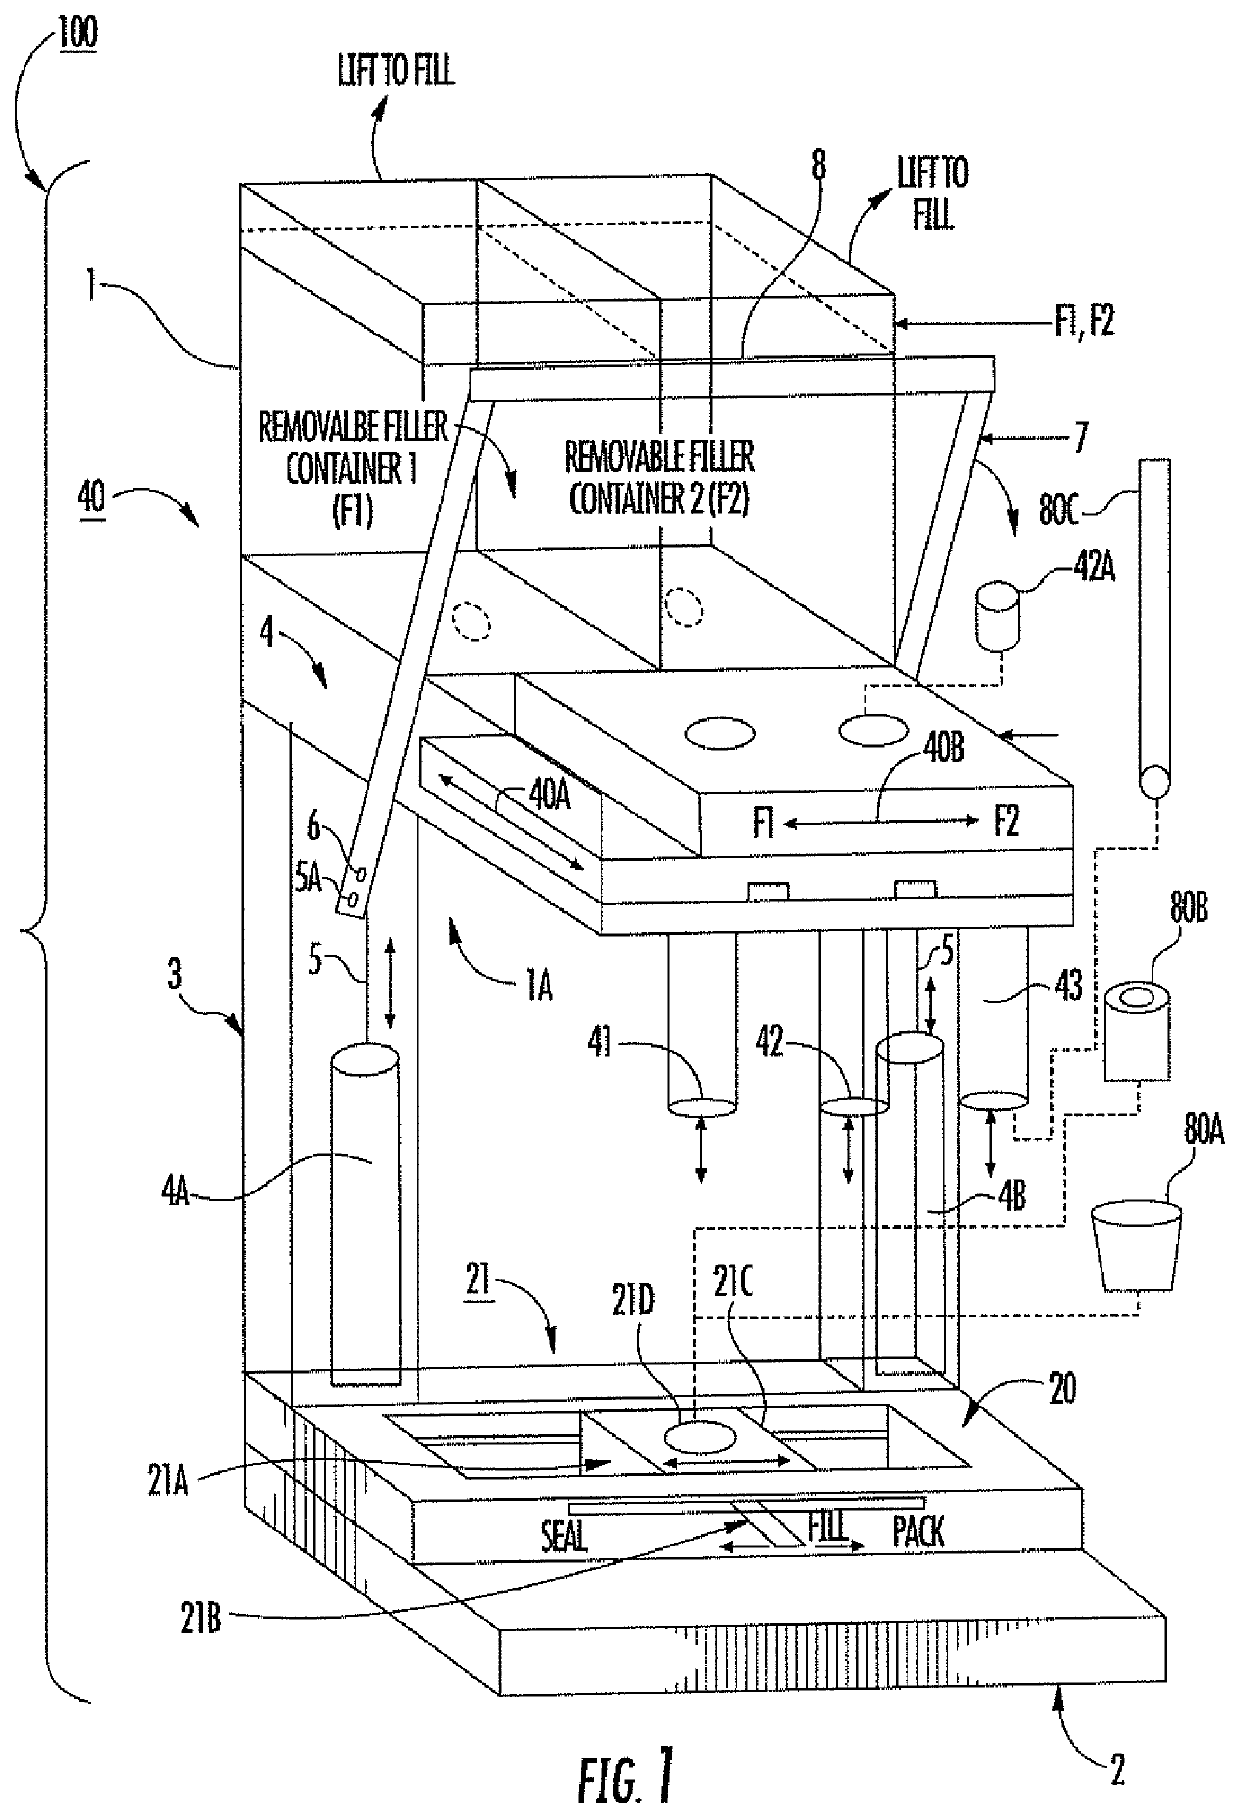 System, apparatus, and method for preparing a beverage cartridge